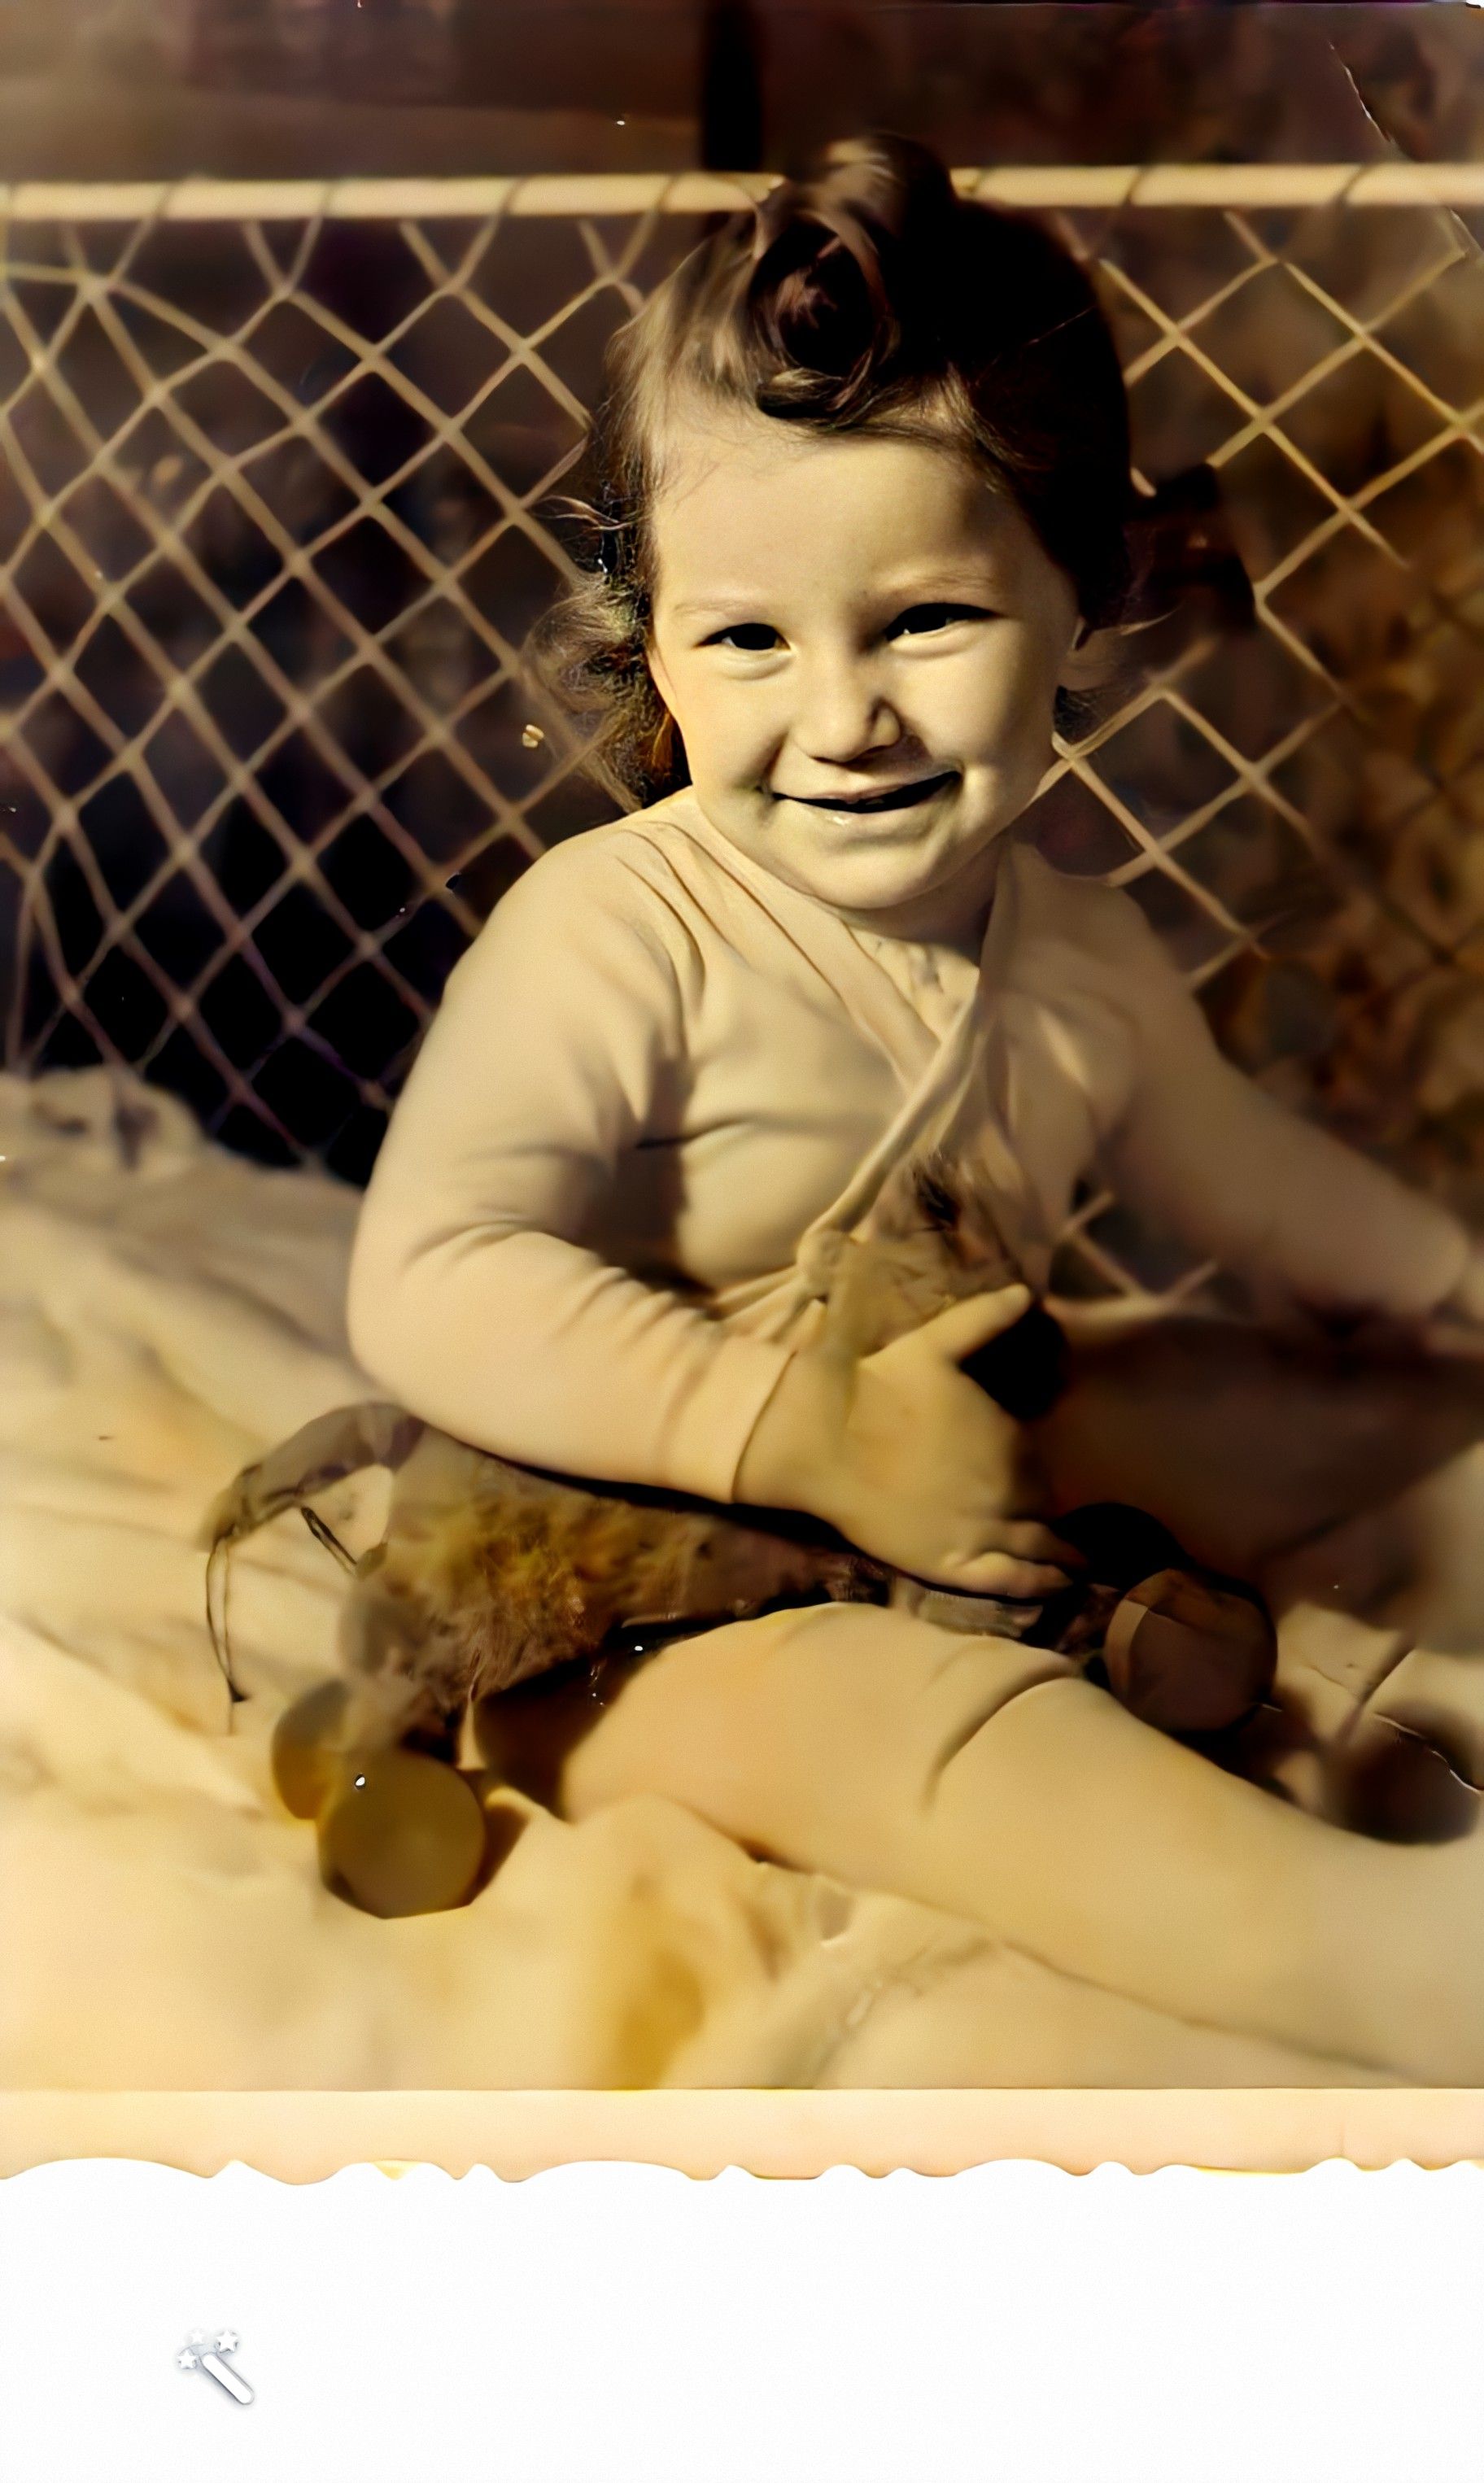 Relli in childhood photos (both 1941)